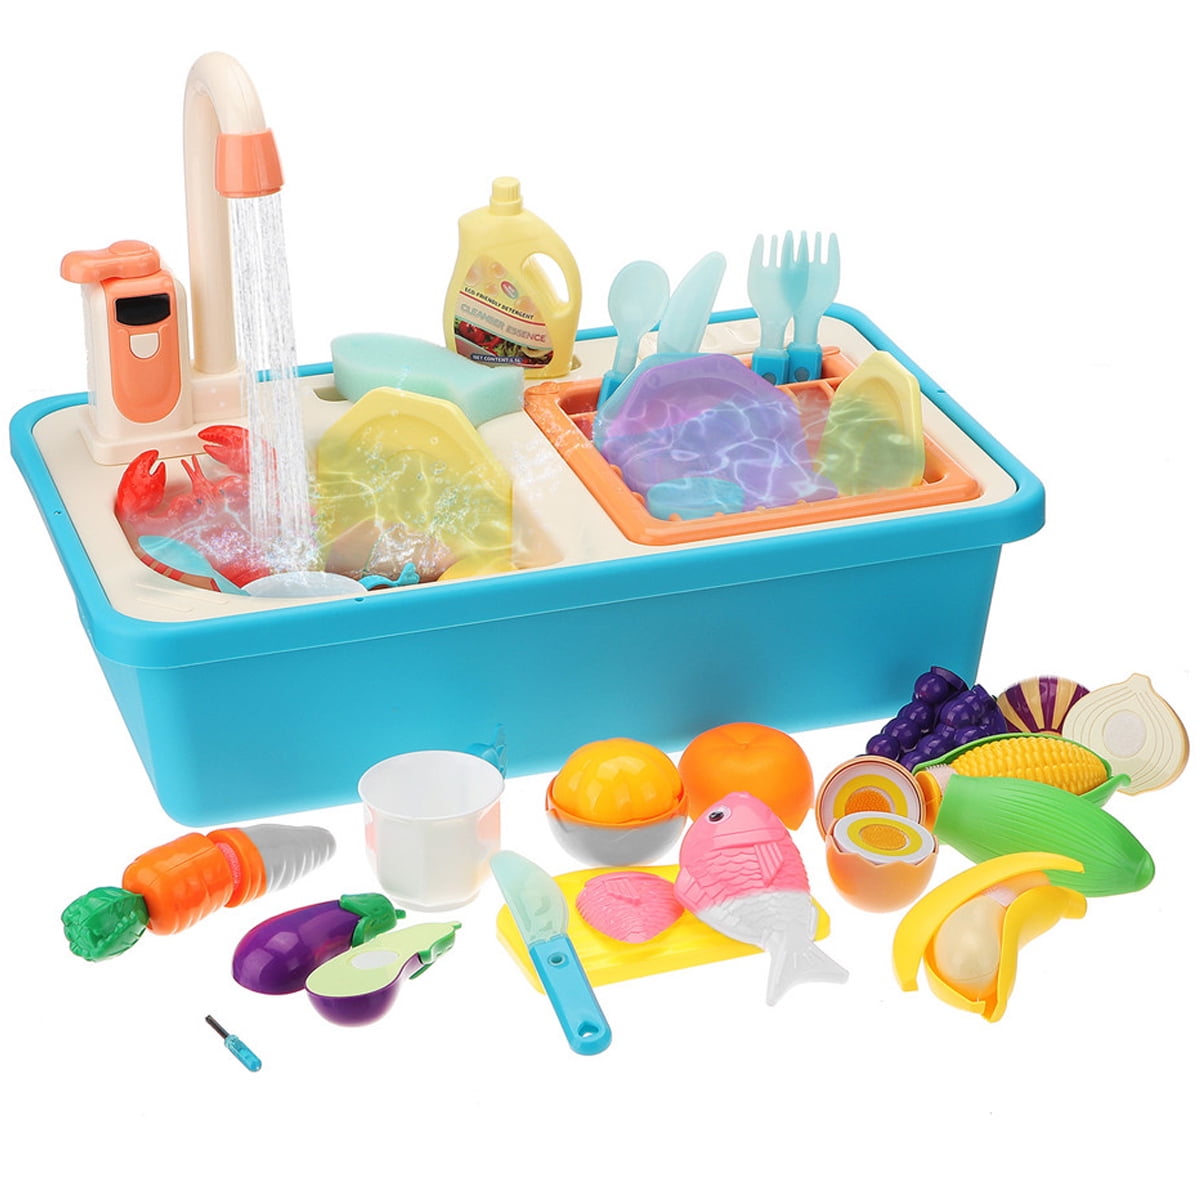 Details about   VBE kid Kitchen Play Set+Realistic Lights & Sounds;Play Sink+Running-Rri 